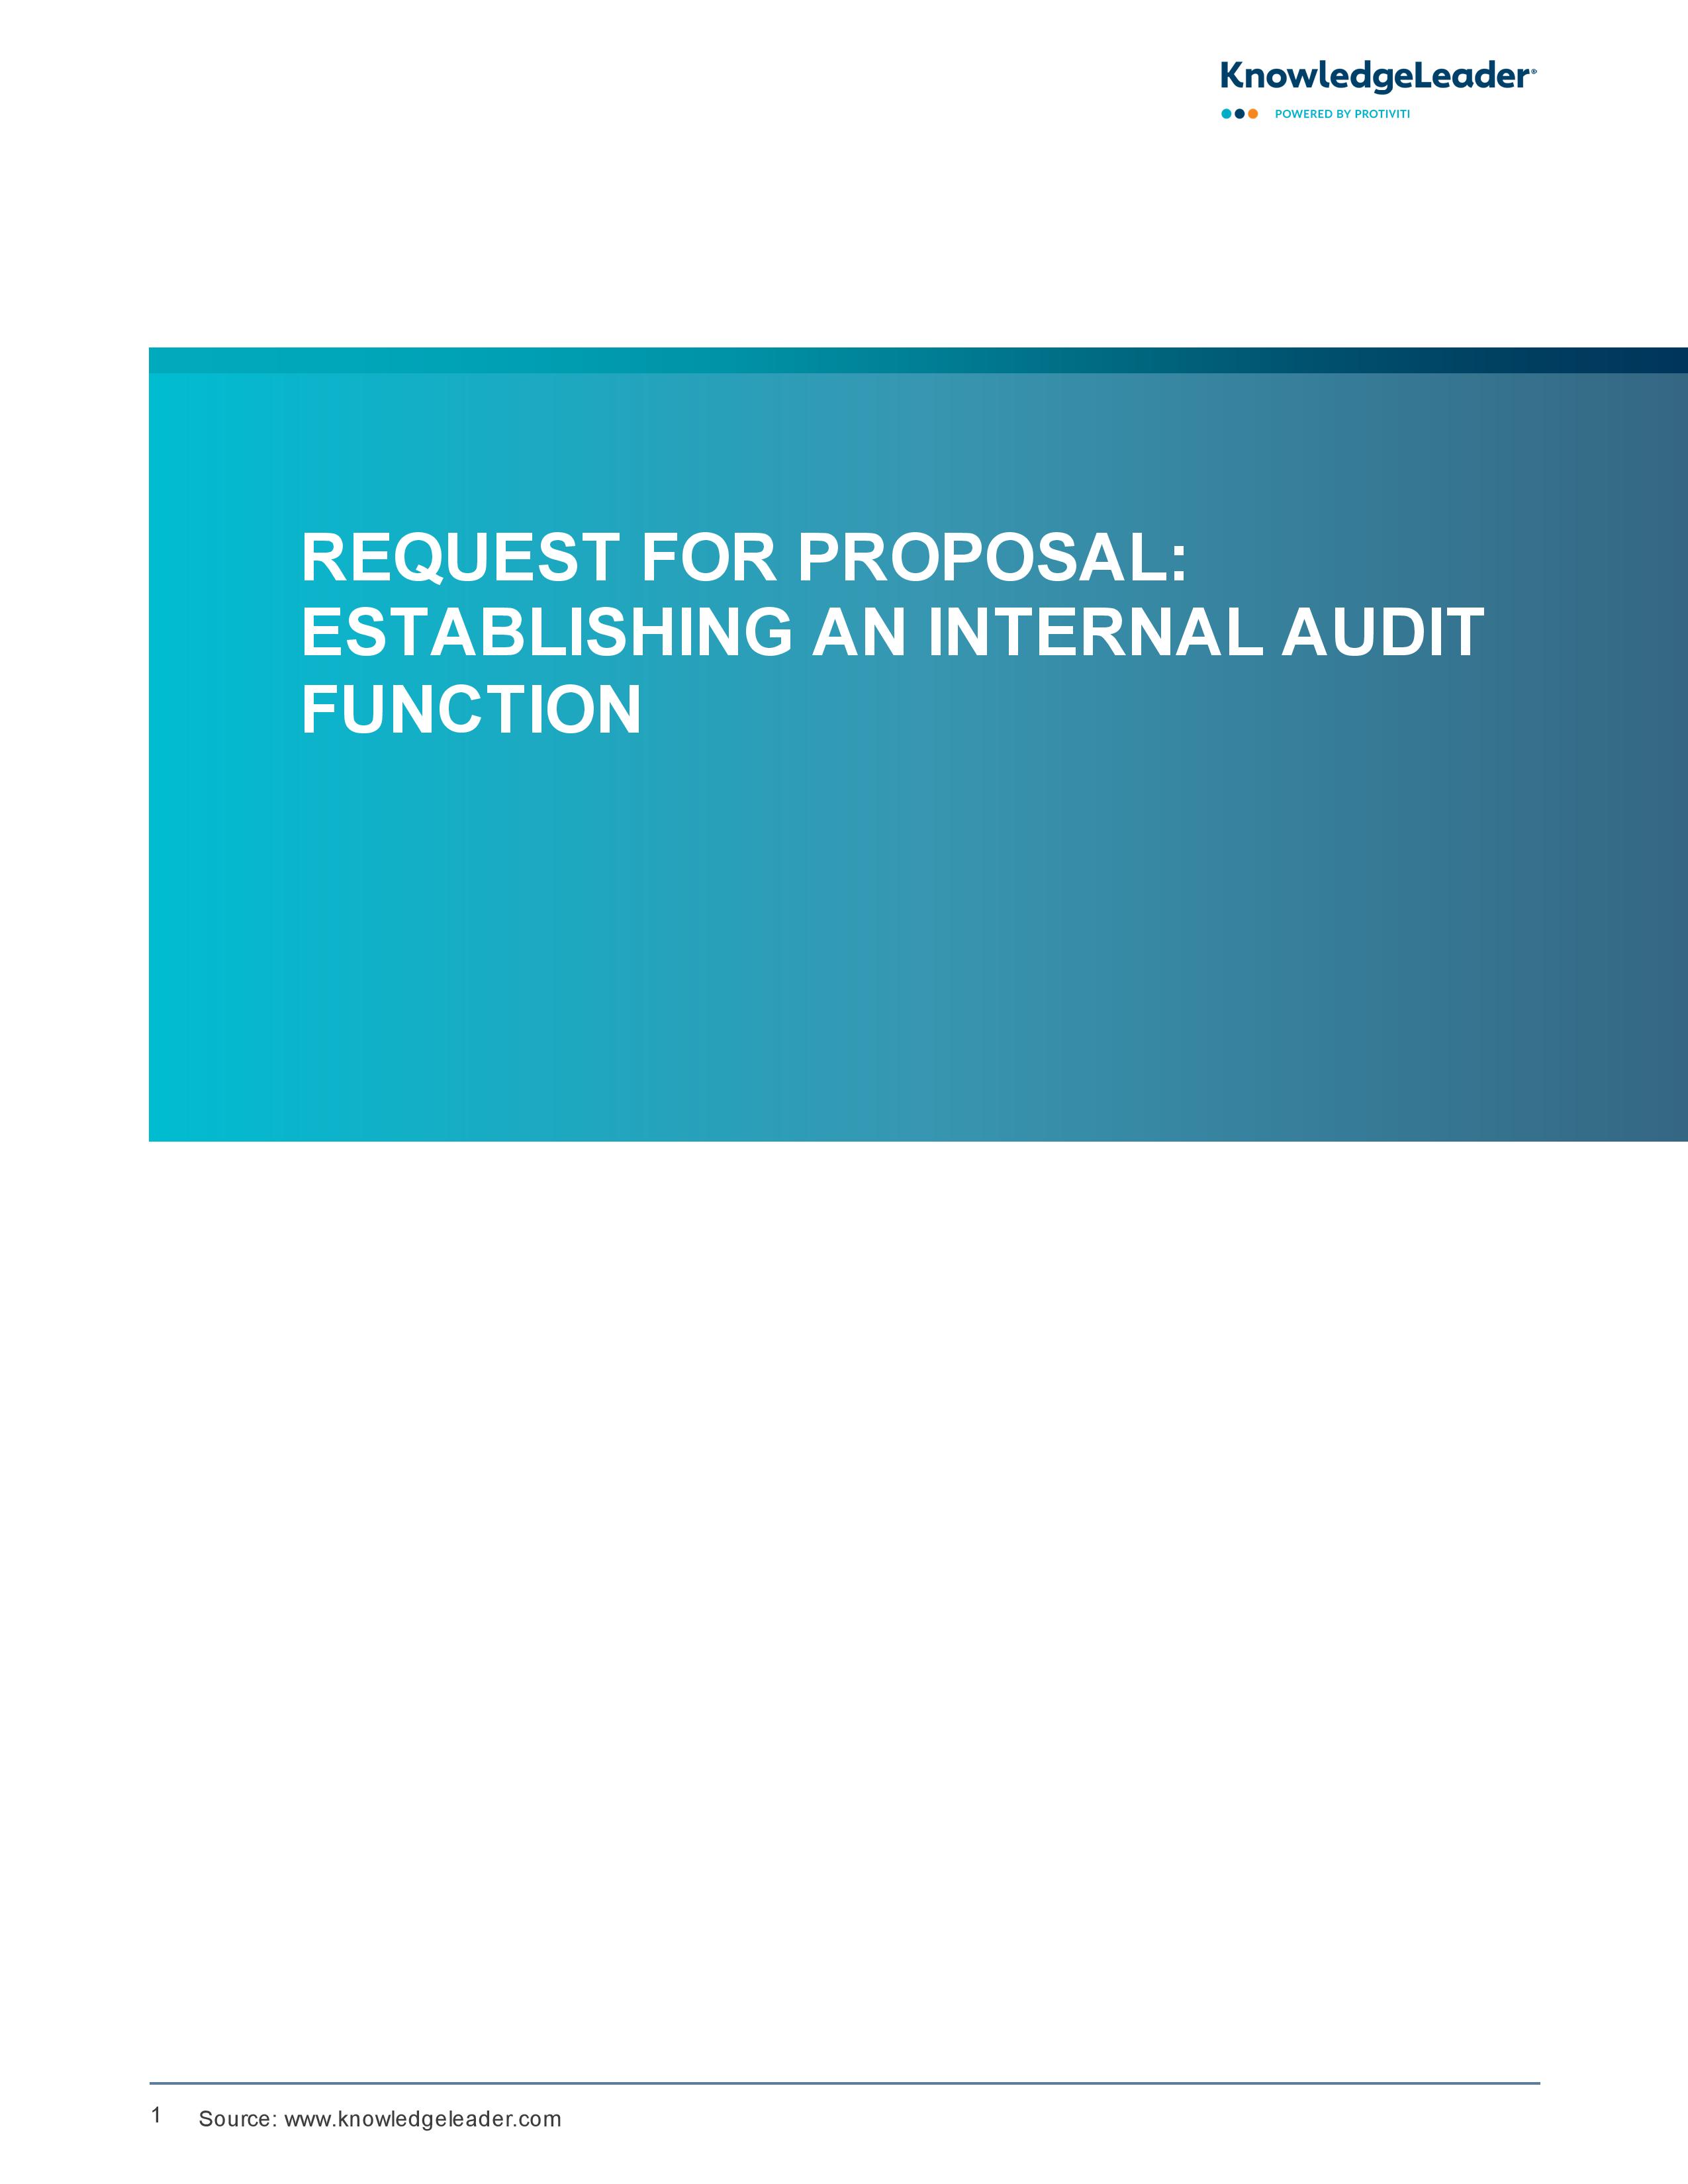 screenshot of the first page of Request for Proposal Establishing an Internal Audit Function